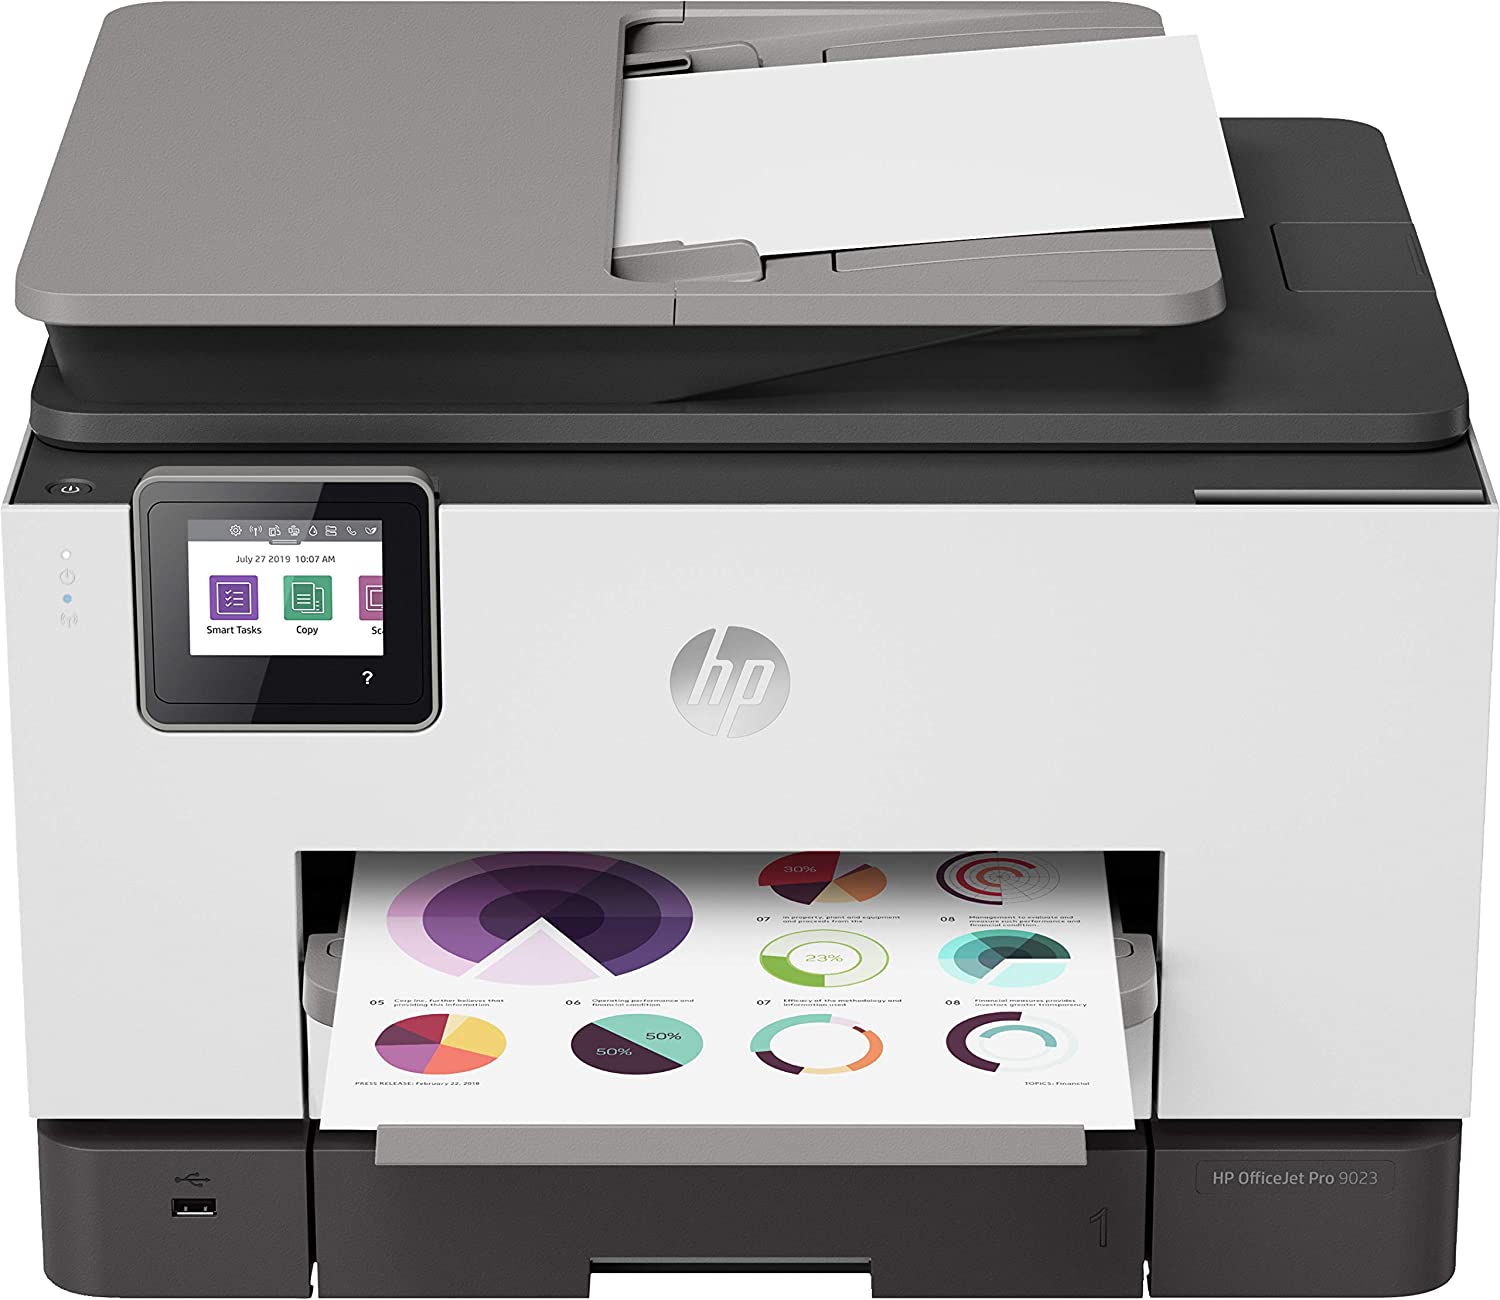 HP OfficeJet Pro 9023 All-in-One Printer3